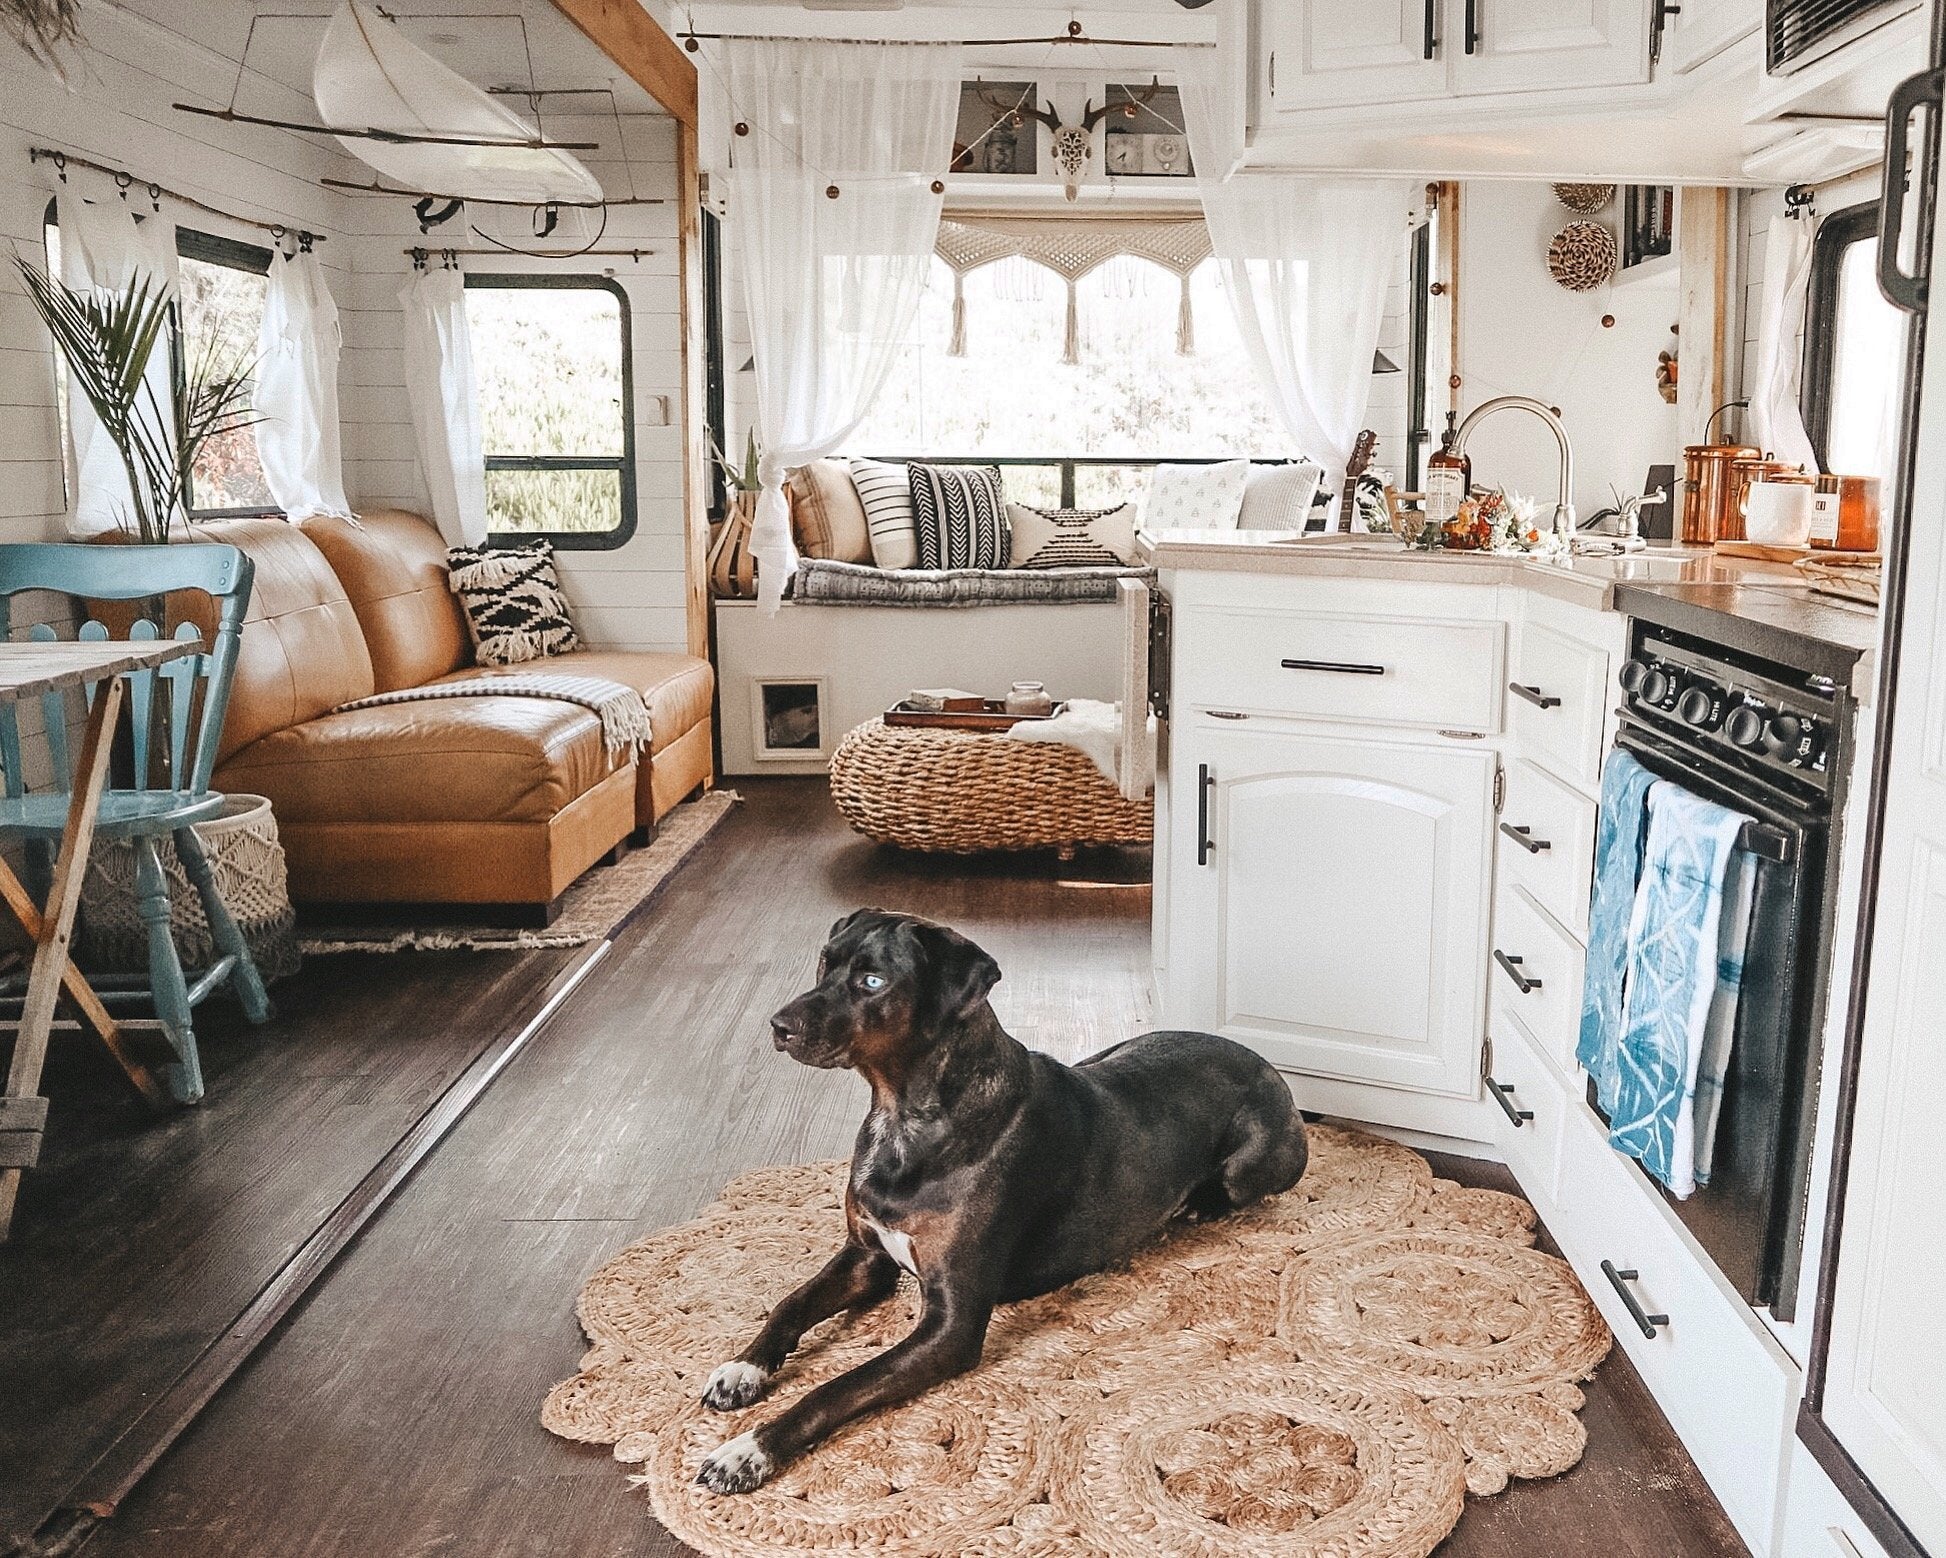 37’ RV Renovated into a Beautiful Full-Time Home in California